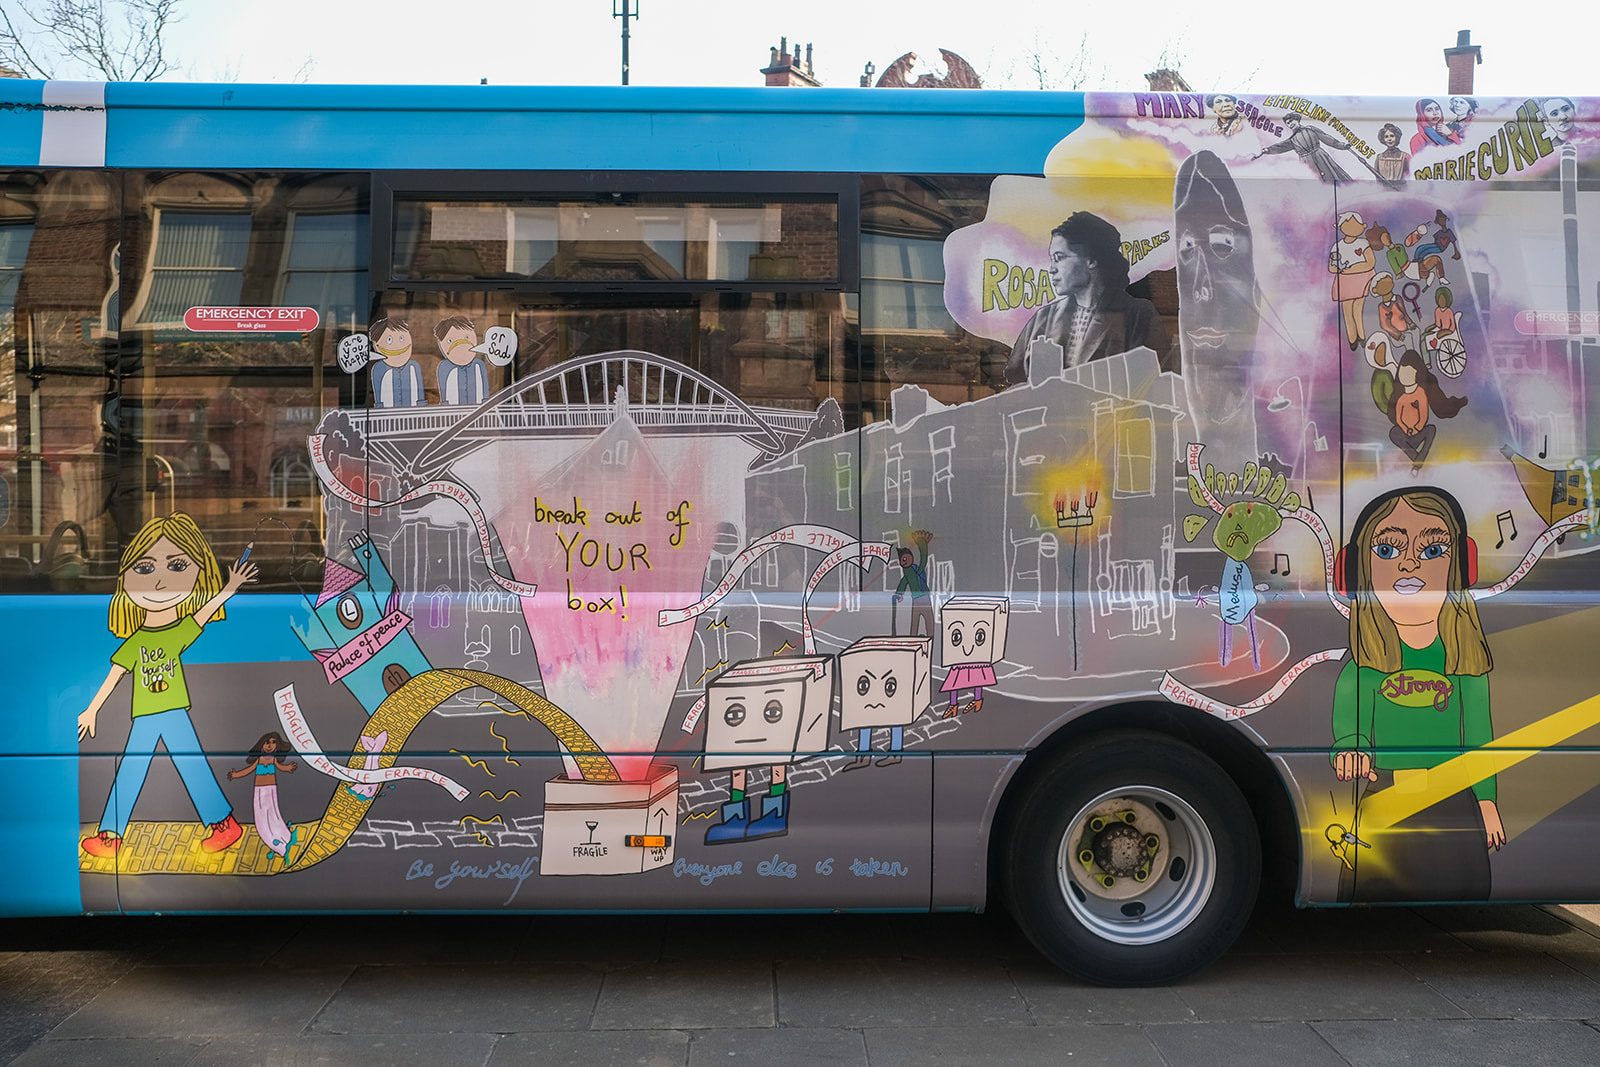 An Arriva North West bus is decorated with colourful designs and illustrations of people and landscapes with inspiration words dotted within the designs.